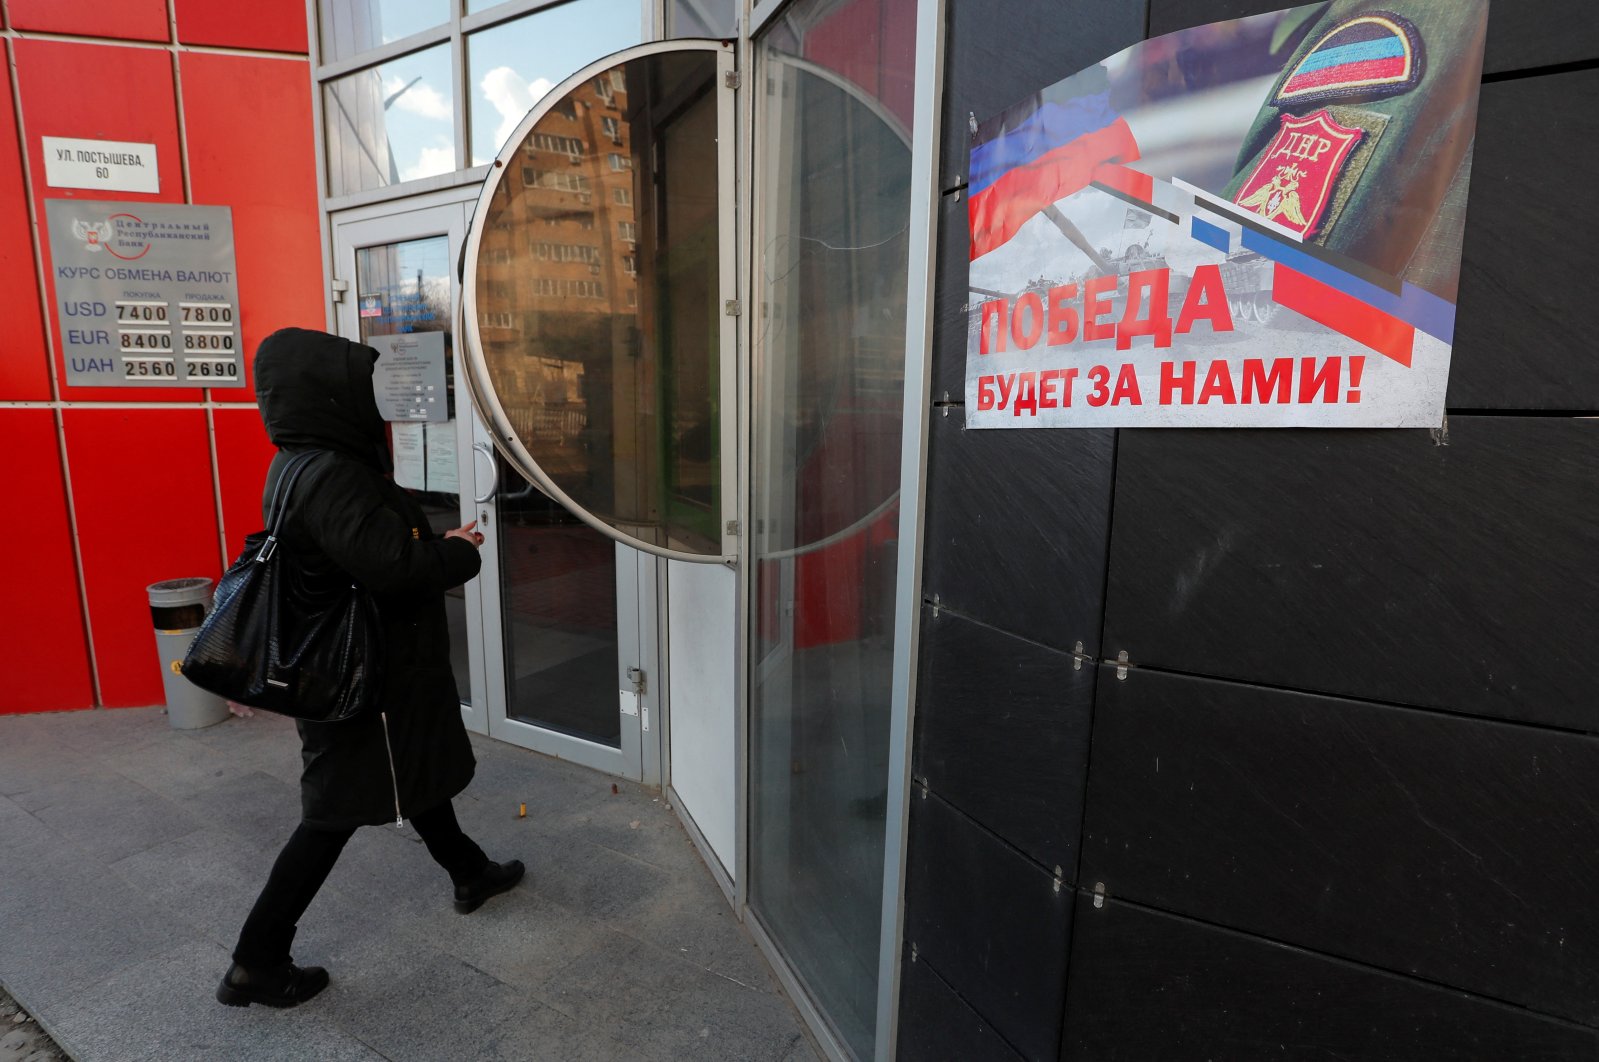 A woman approaches an ATM money machine in the separatist-controlled city of Donetsk, Ukraine, Feb. 21, 2022. (Reuters Photo)